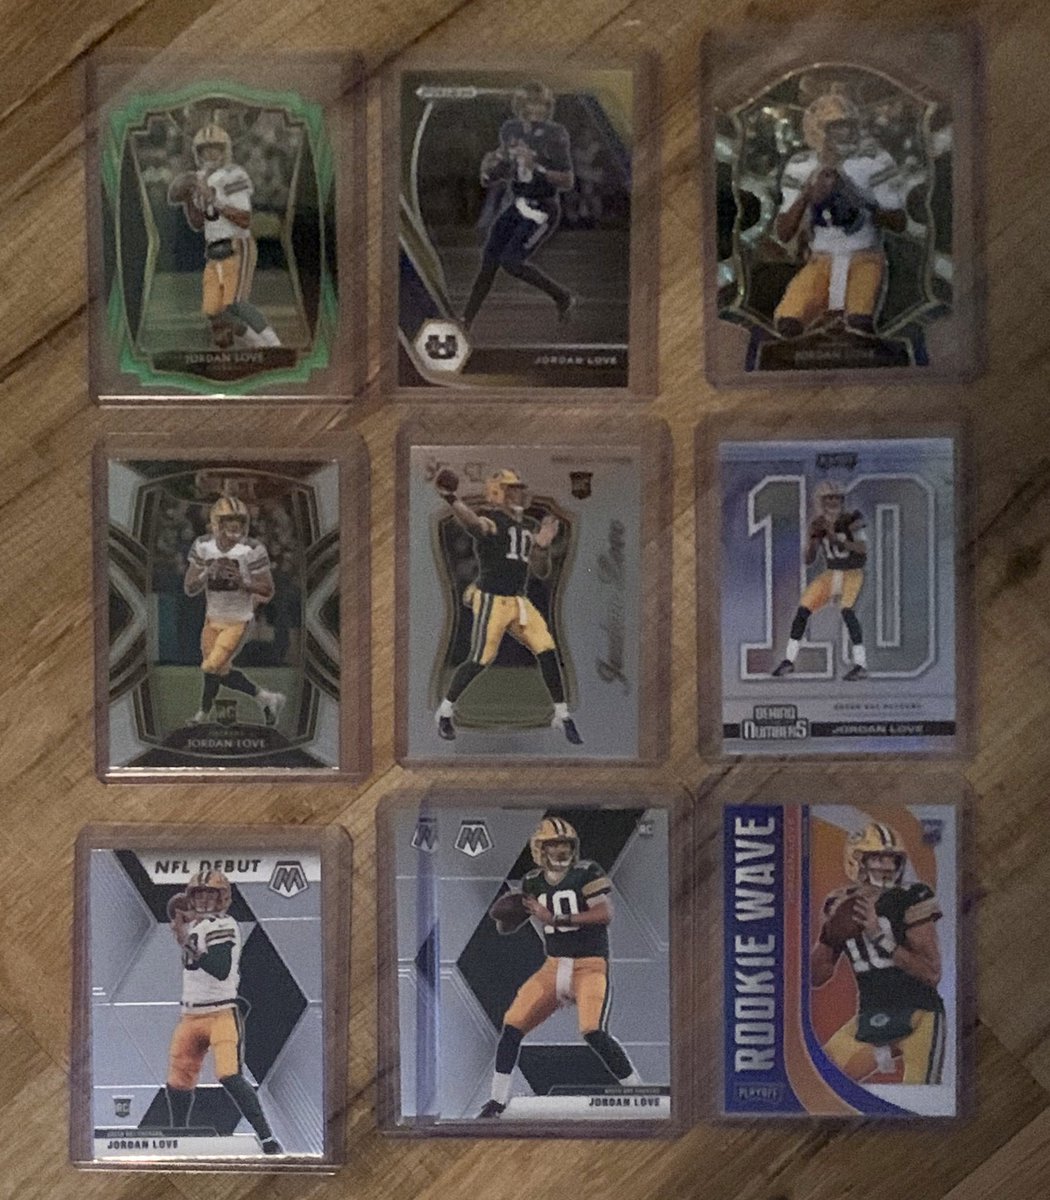 J O R D A N   L O V E #Packers #QB #UtahState 

Gold Draft Picks /5
Select Green Prizm Premiere Level
Select Tri-Color Prizm 
Behind The Numbers Prizm
Rookie Wave Prizm
Select Insert & Club Level
2020 Mosaic & NFL Debut

@sports_sell @HobbyConnector @Hobby_Connect @CardPurchaser https://t.co/uZTz5Fh5PV